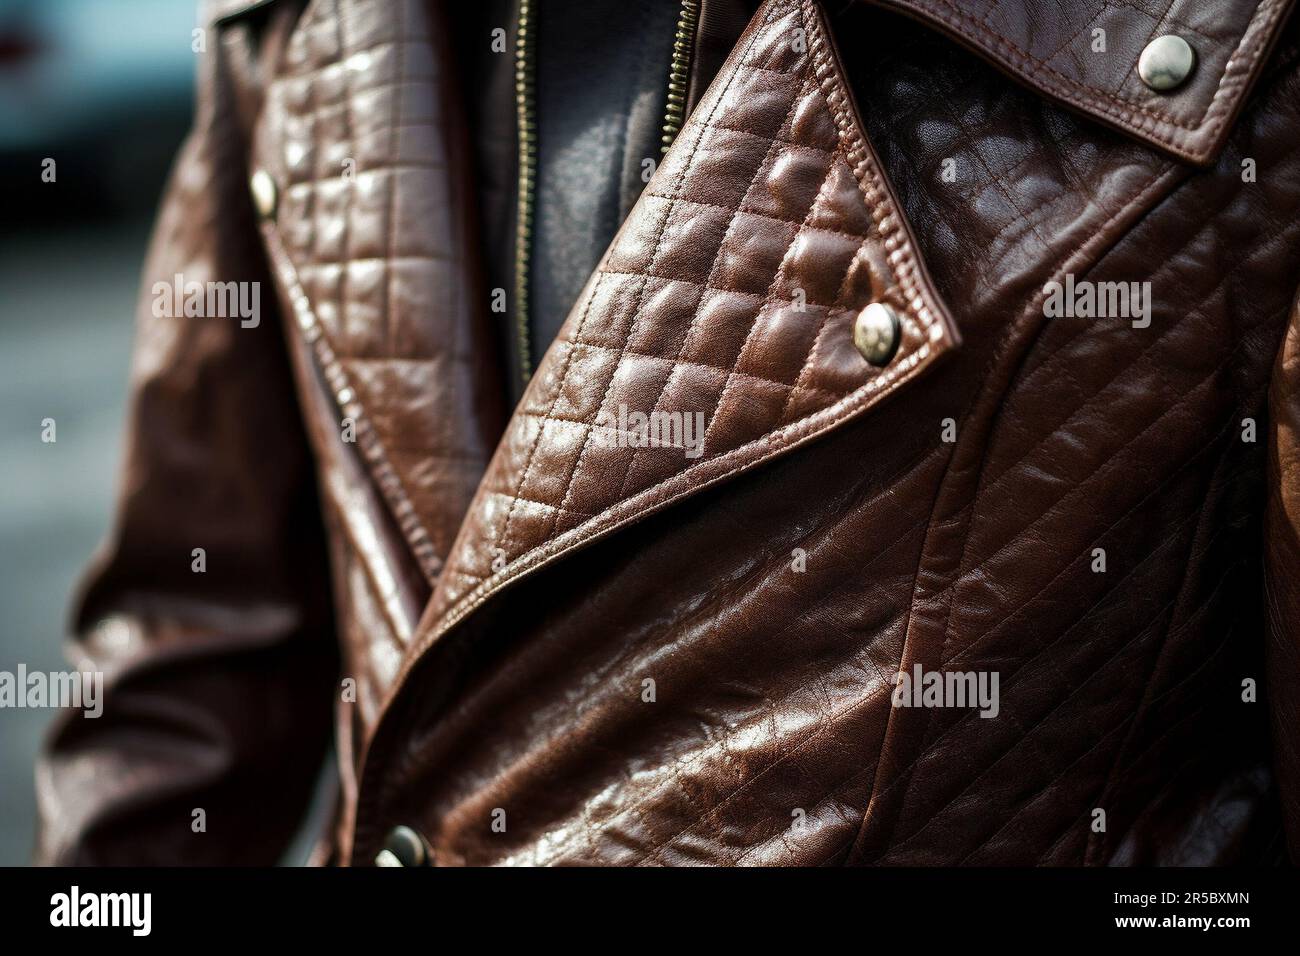 Close up fashion details of dark brown leather classy jacket. Fancy unisex clothing Stock Photo